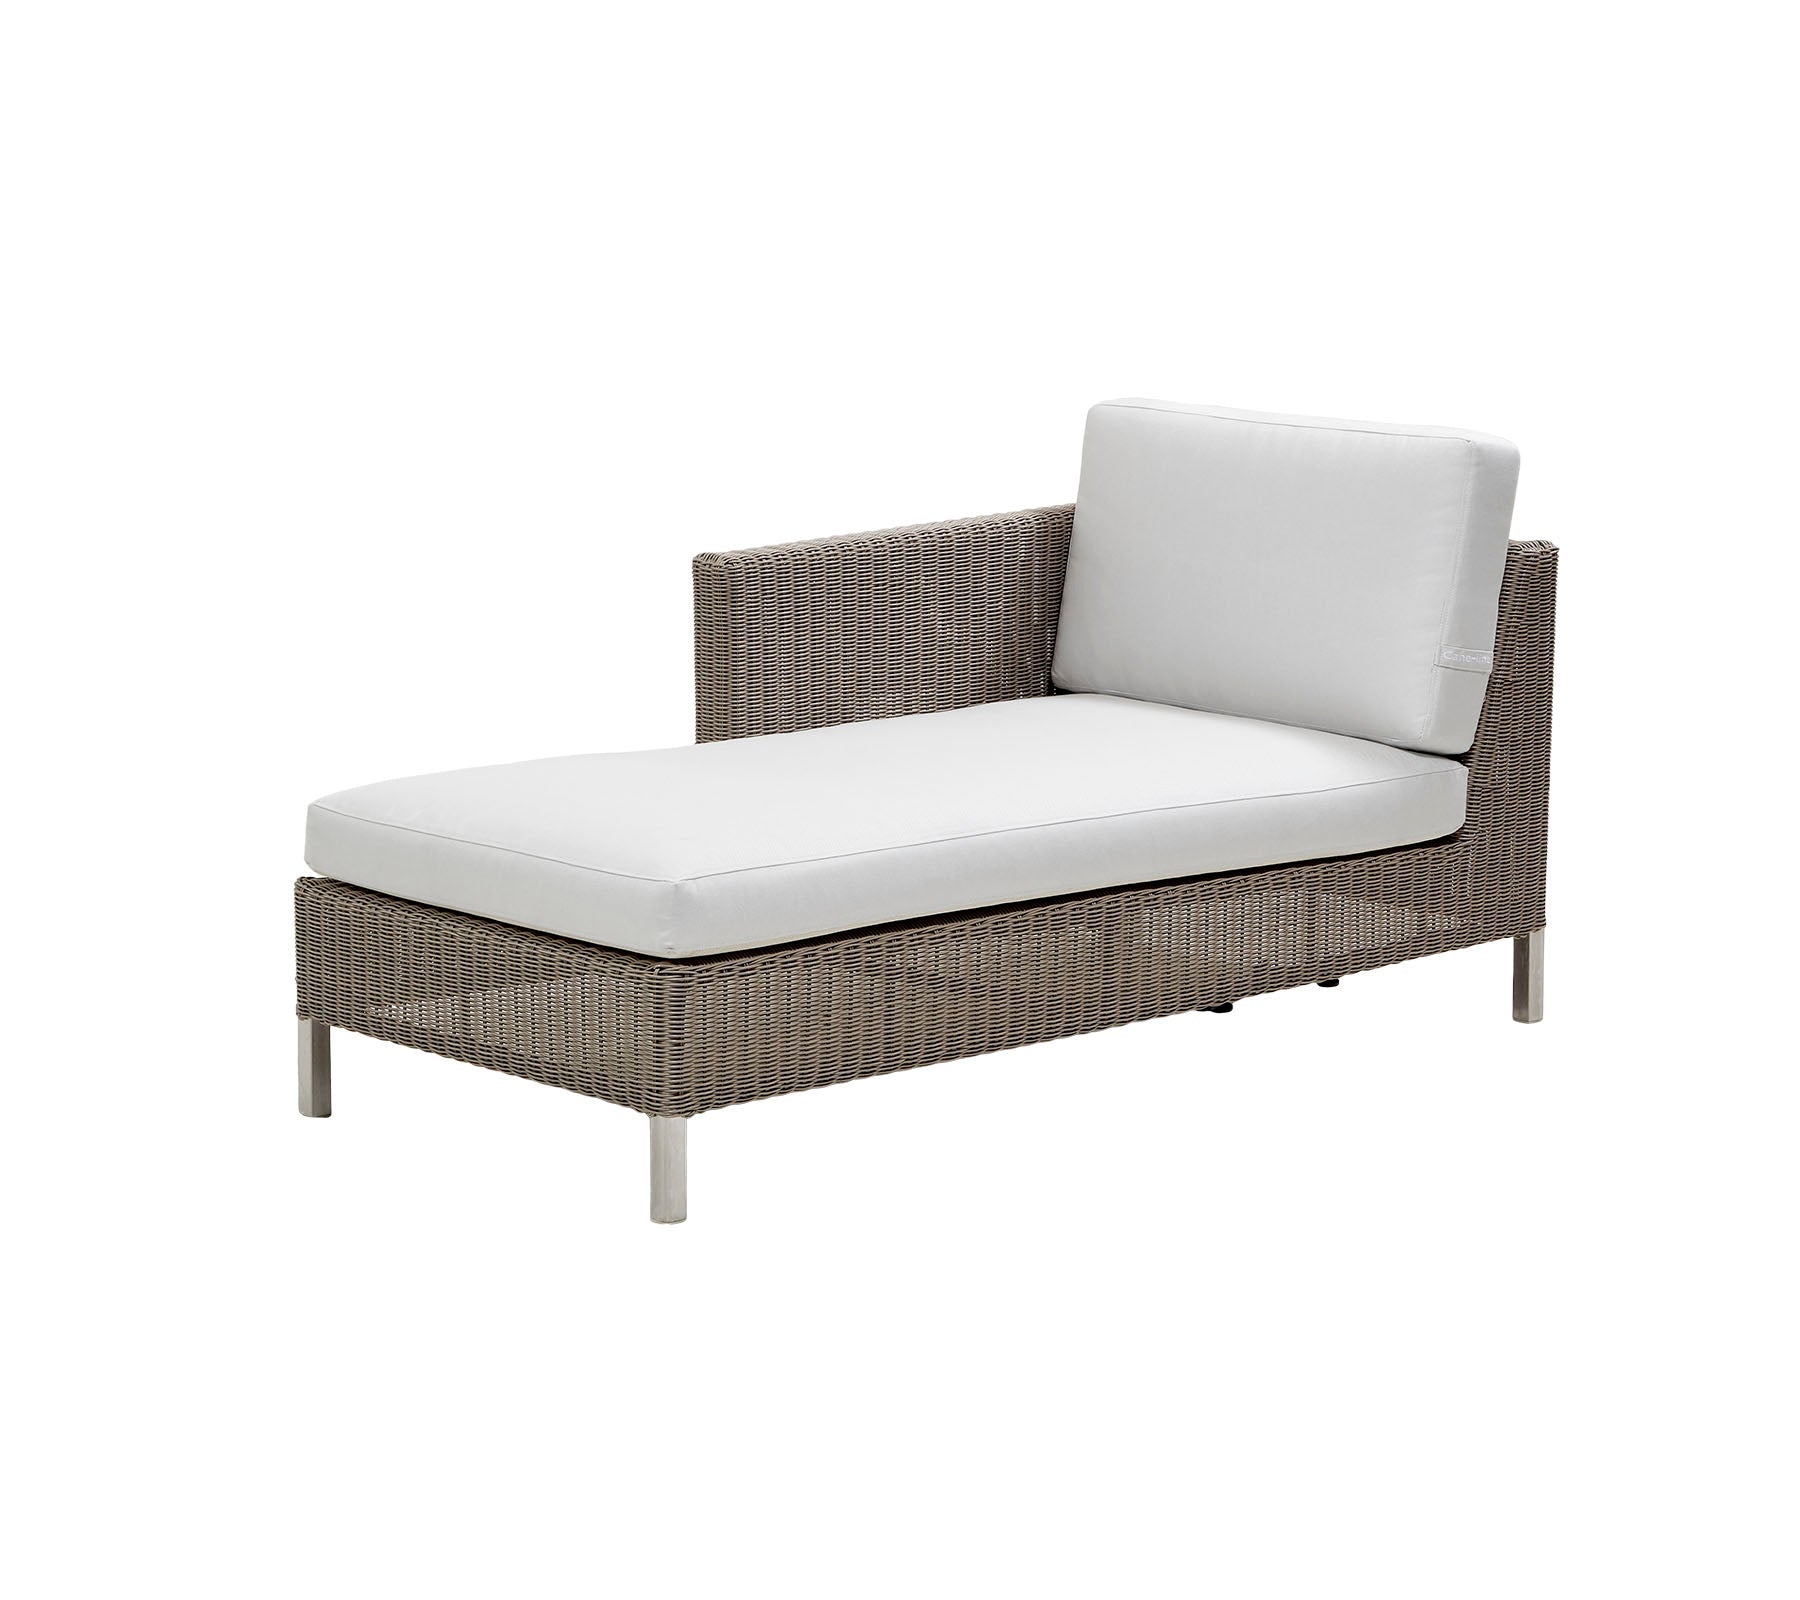 Cane-line Connect Chaise Lounge Module Sofa Right 5596T